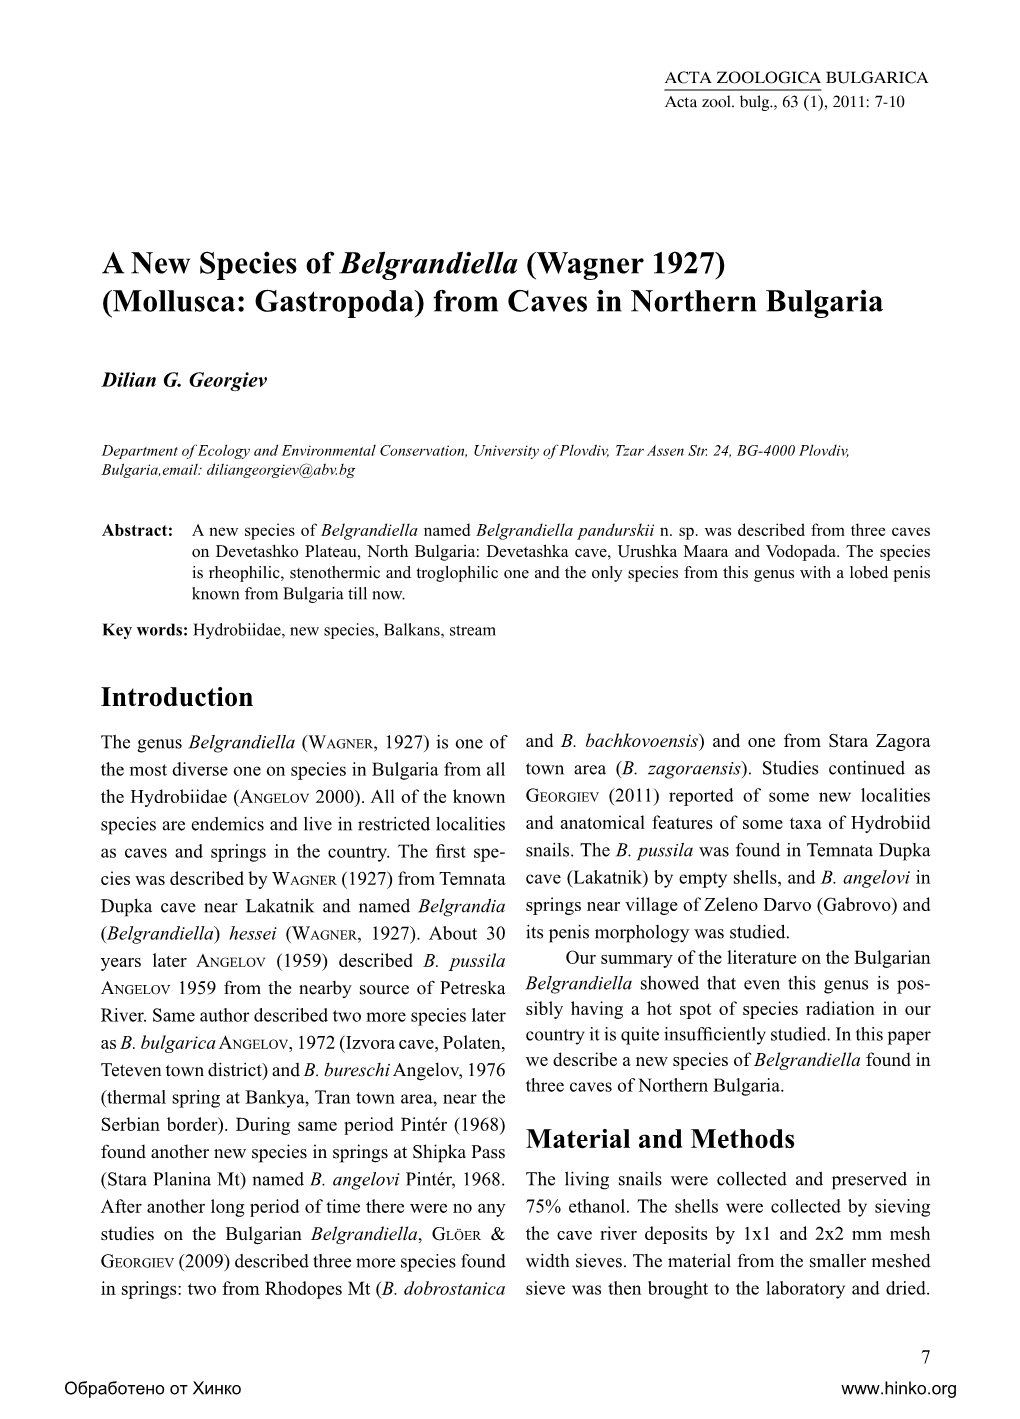 A New Species of Belgrandiella (Wagner 1927) (Mollusca: Gastropoda) from Caves in Northern Bulgaria